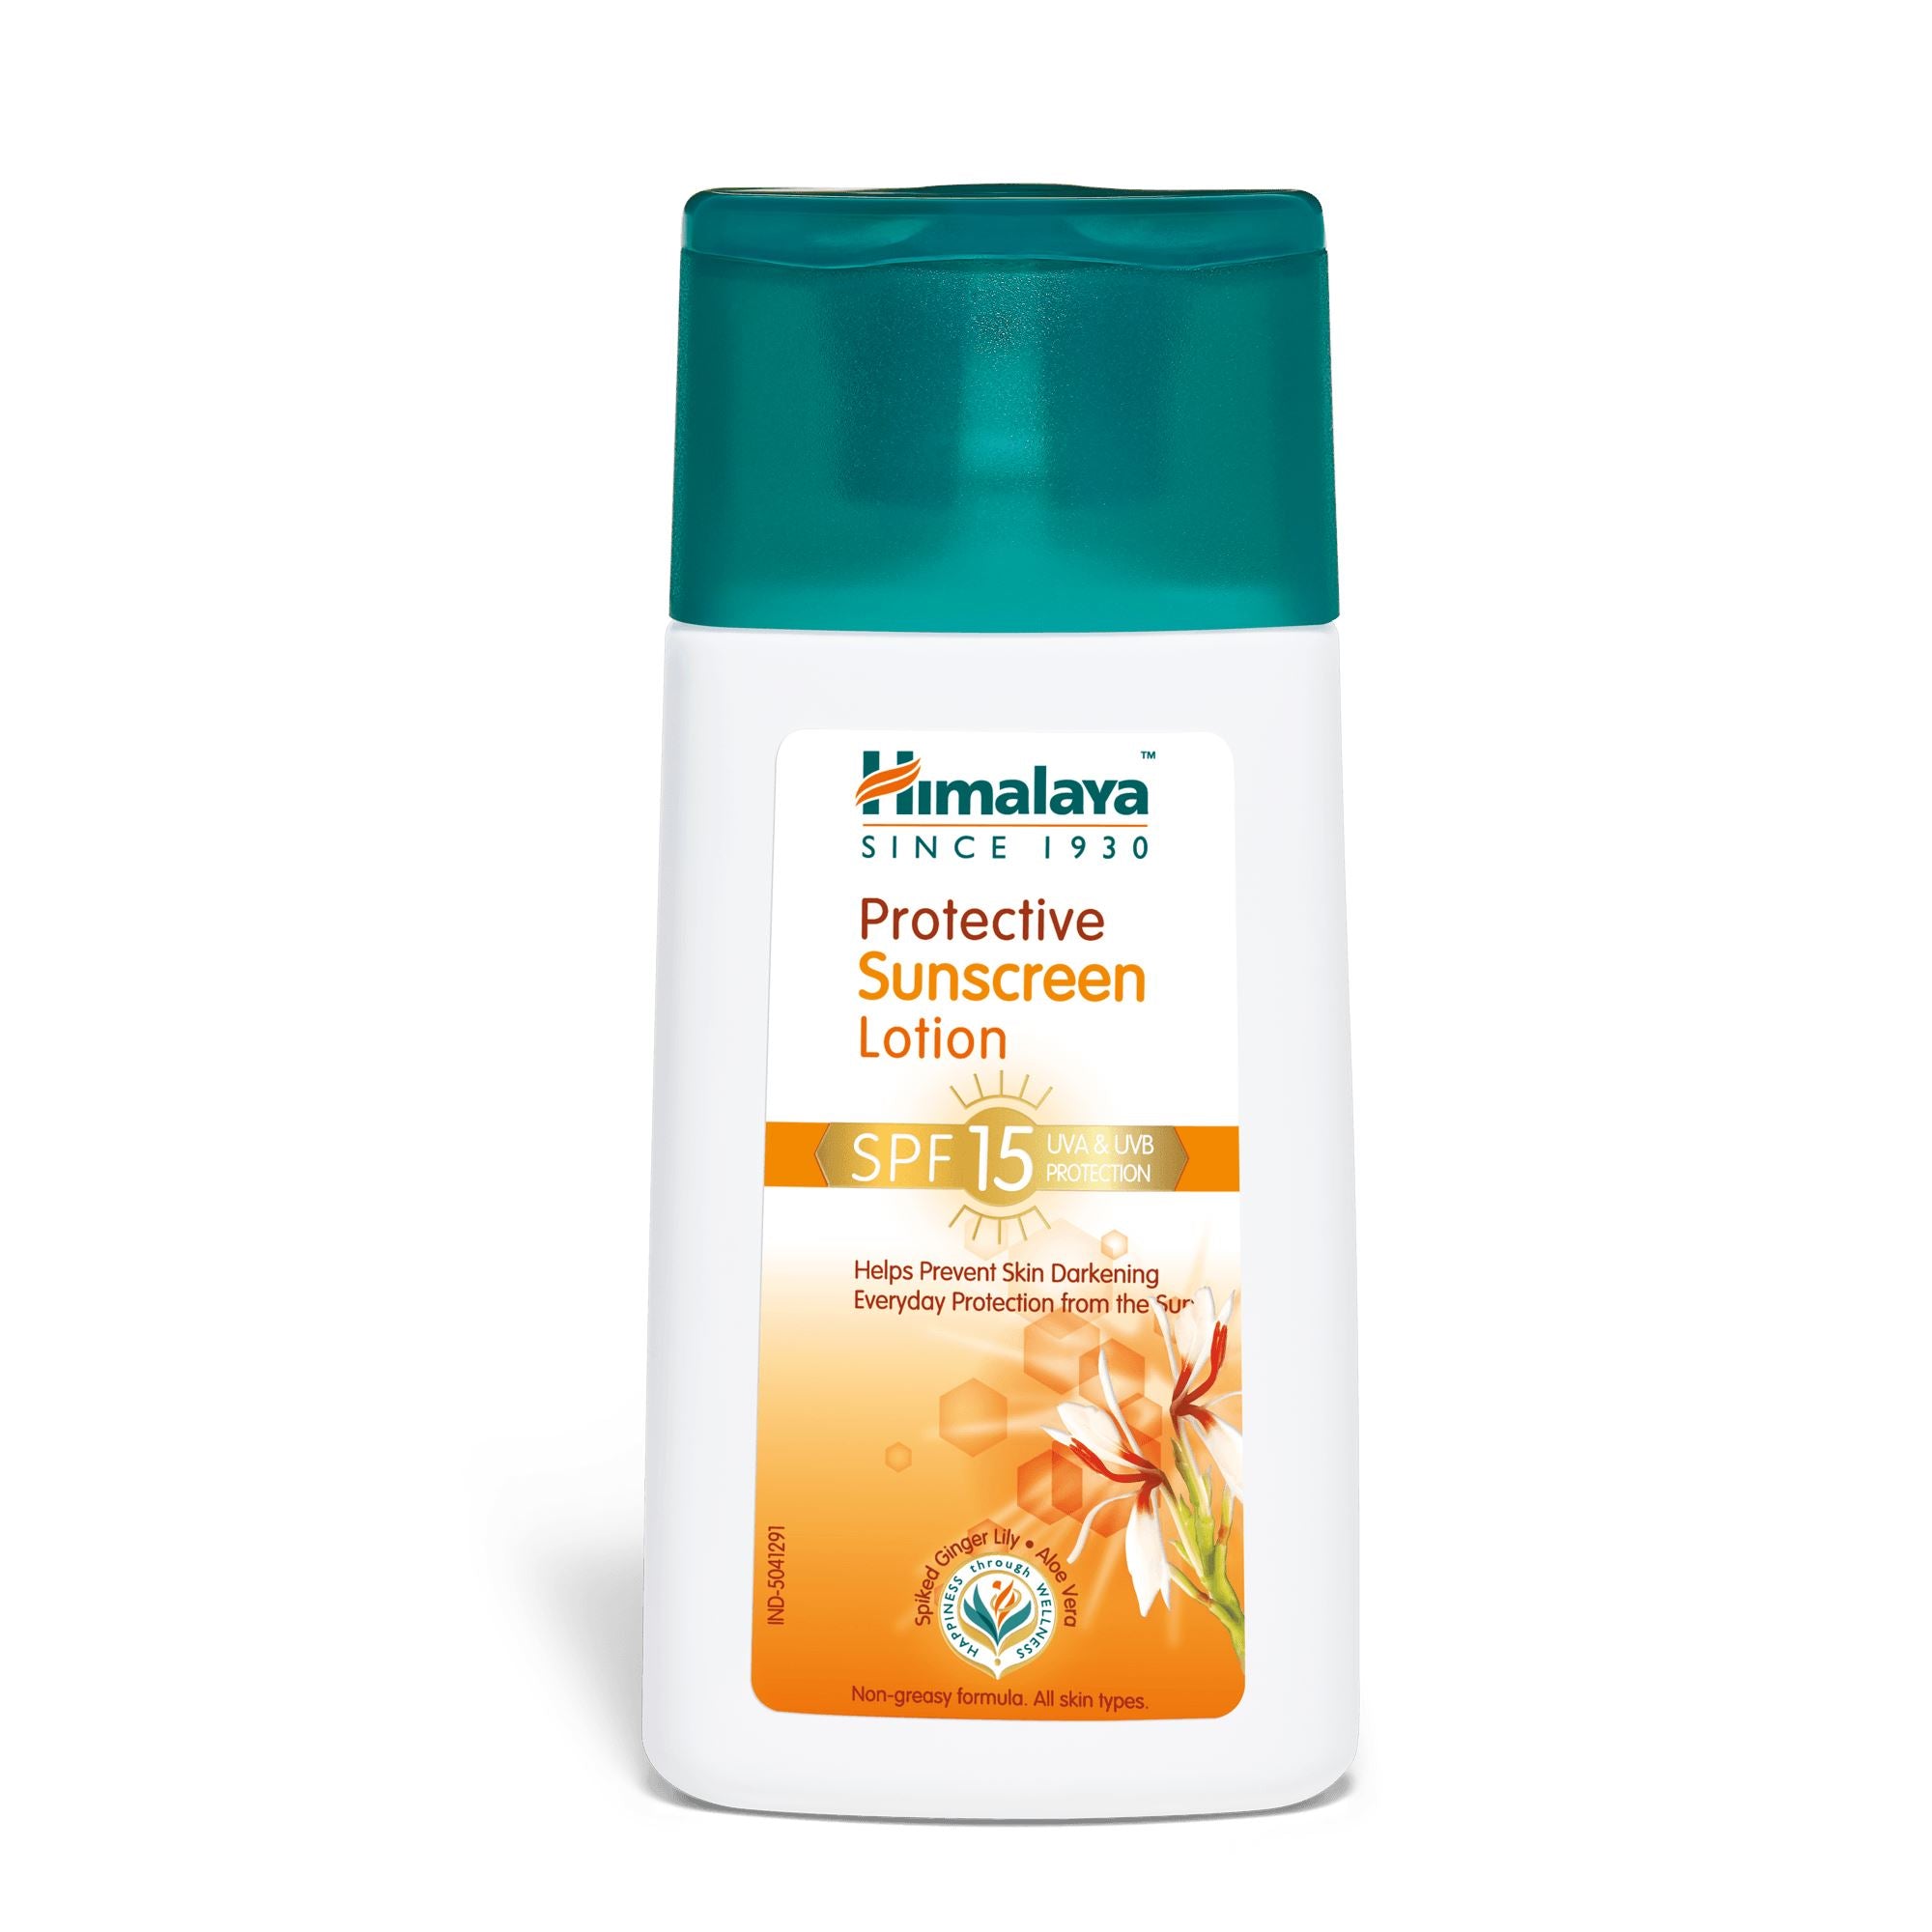 Himalaya Protective Sunscreen Lotion 50ml - Everyday protection from the sun